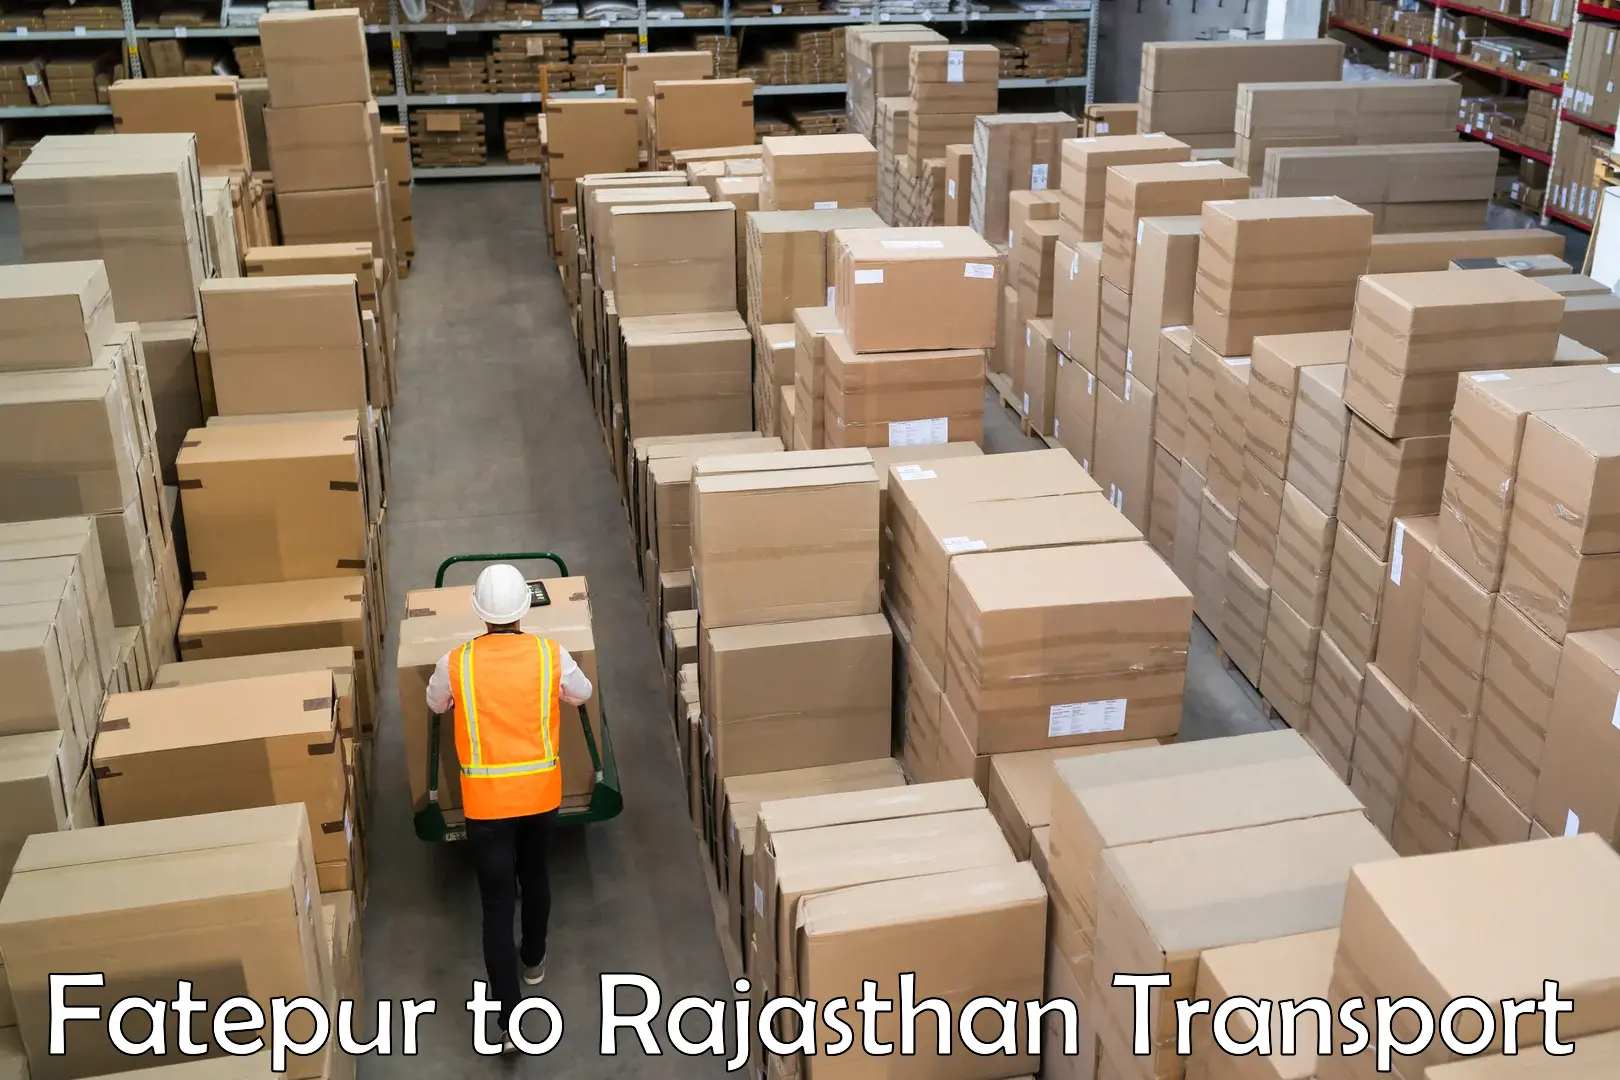 Daily transport service in Fatepur to Kishangarh